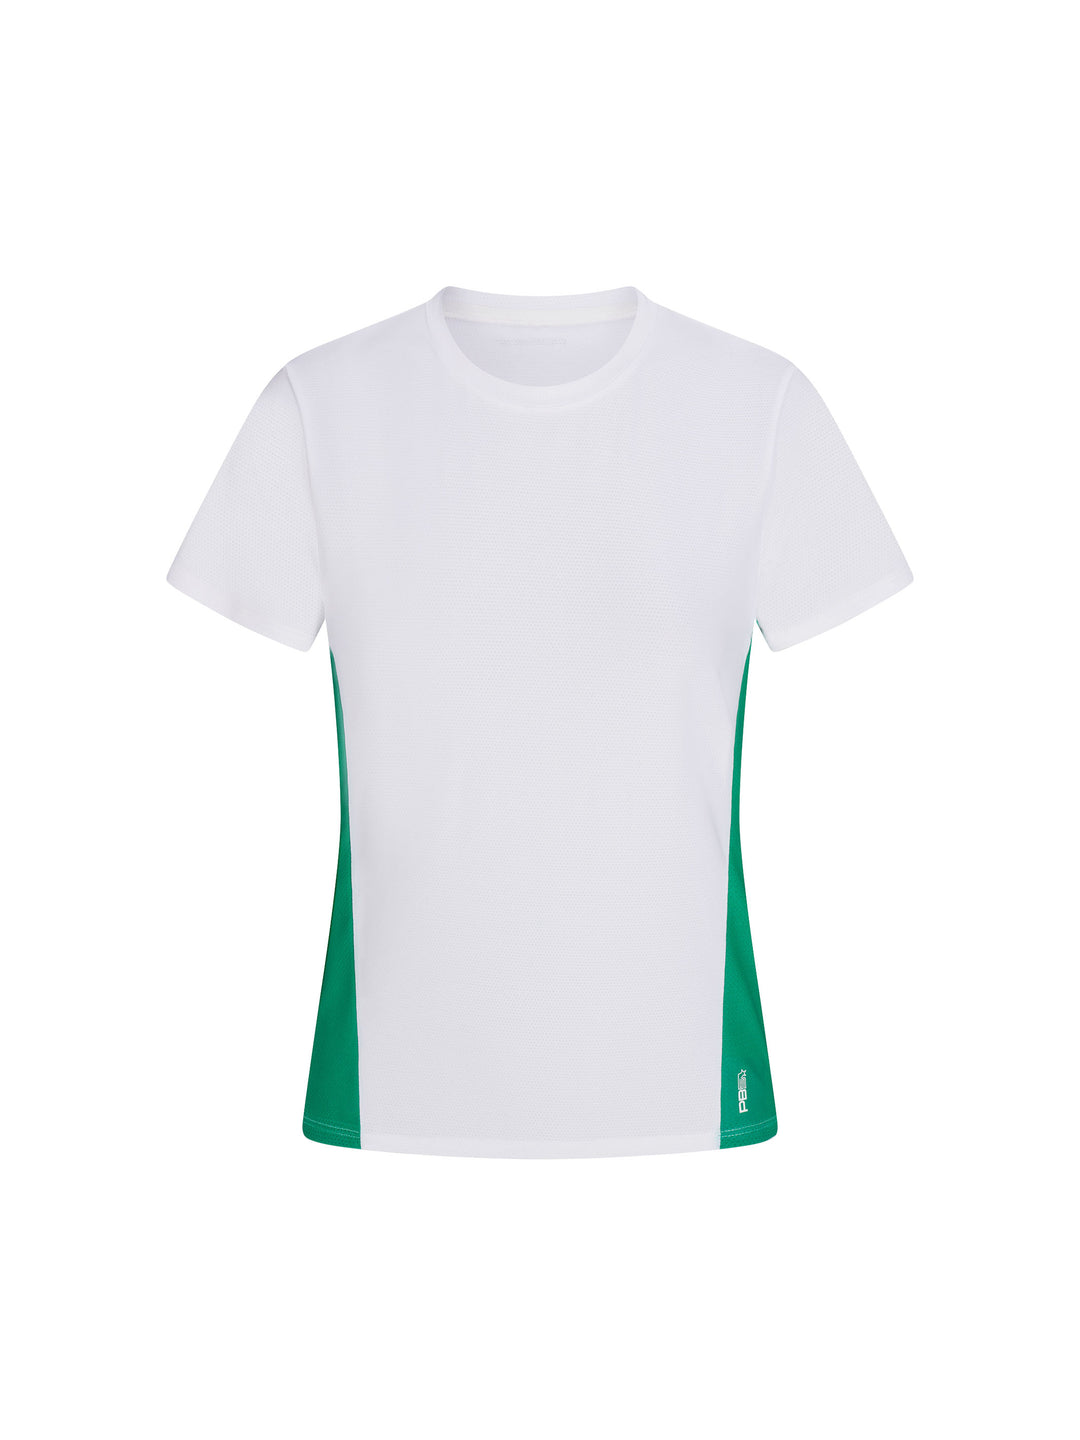 Women's Vented Court Tee front view in white and jade. Small logo on lower left side.